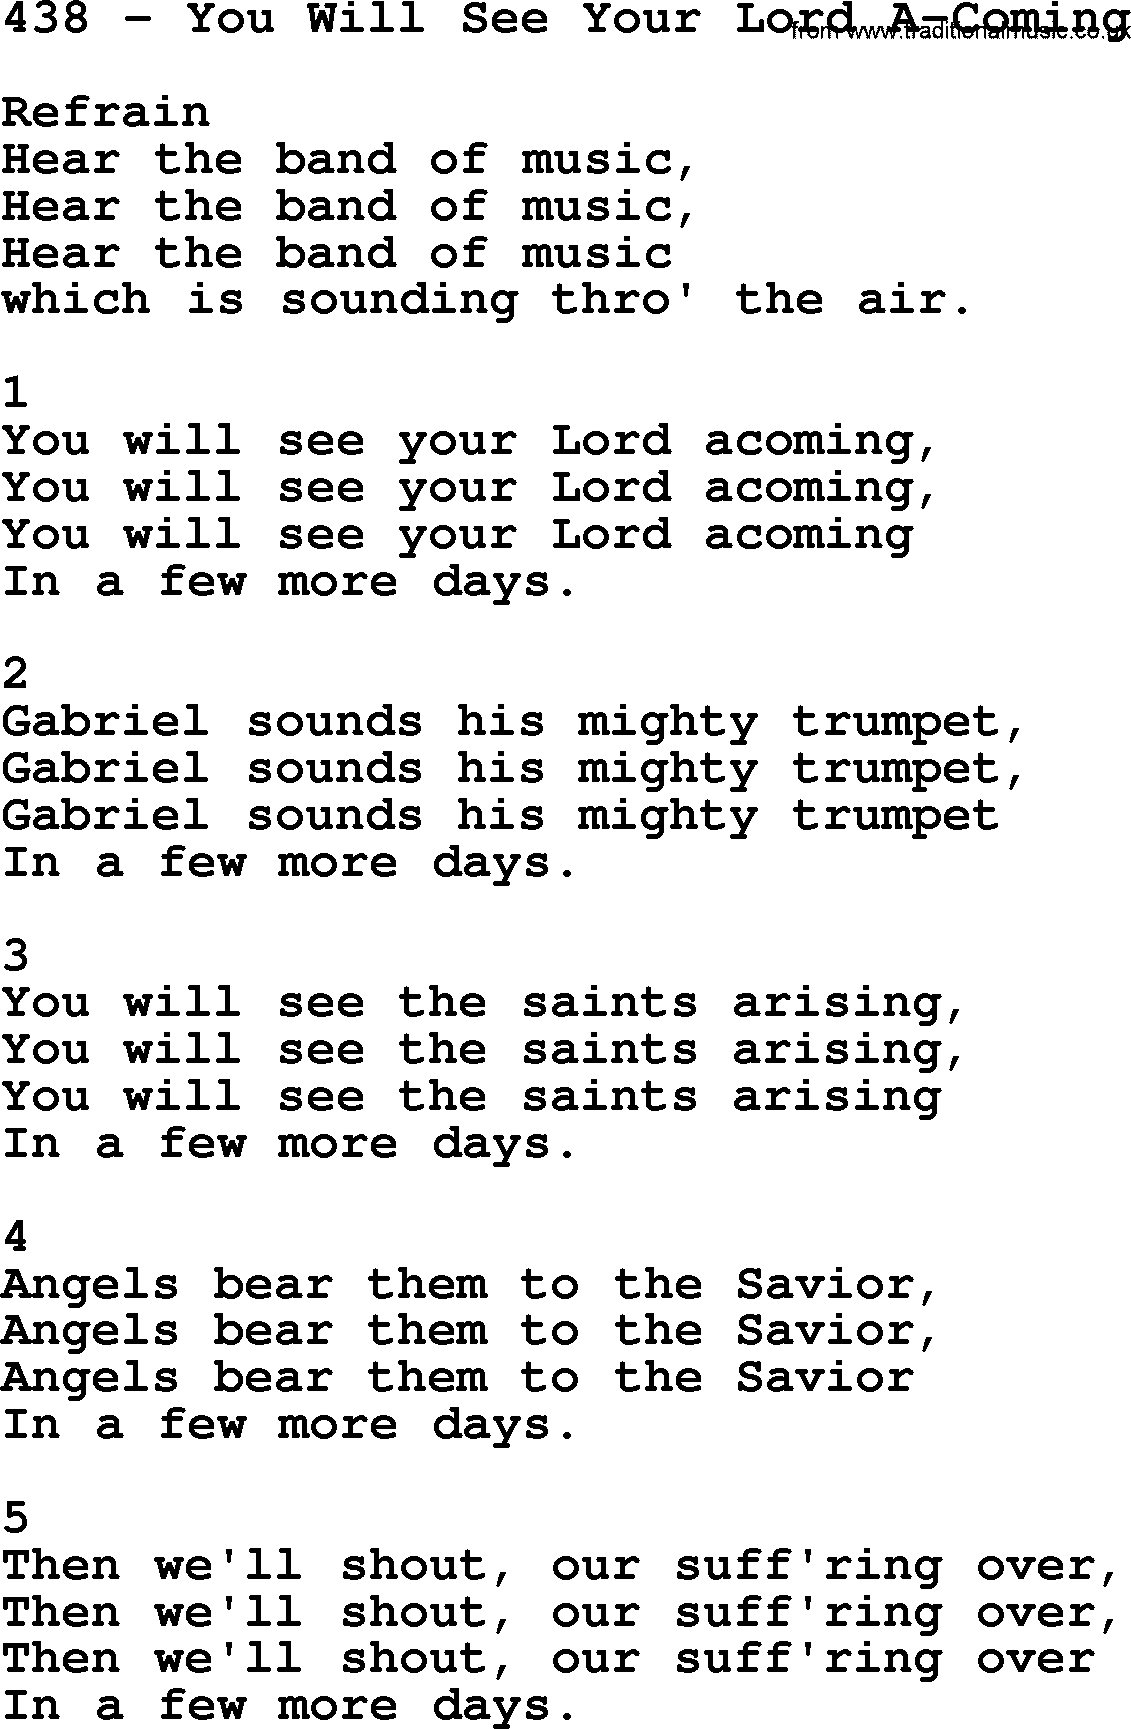 Complete Adventis Hymnal, title: 438-You Will See Your Lord A-Coming, with lyrics, midi, mp3, powerpoints(PPT) and PDF,